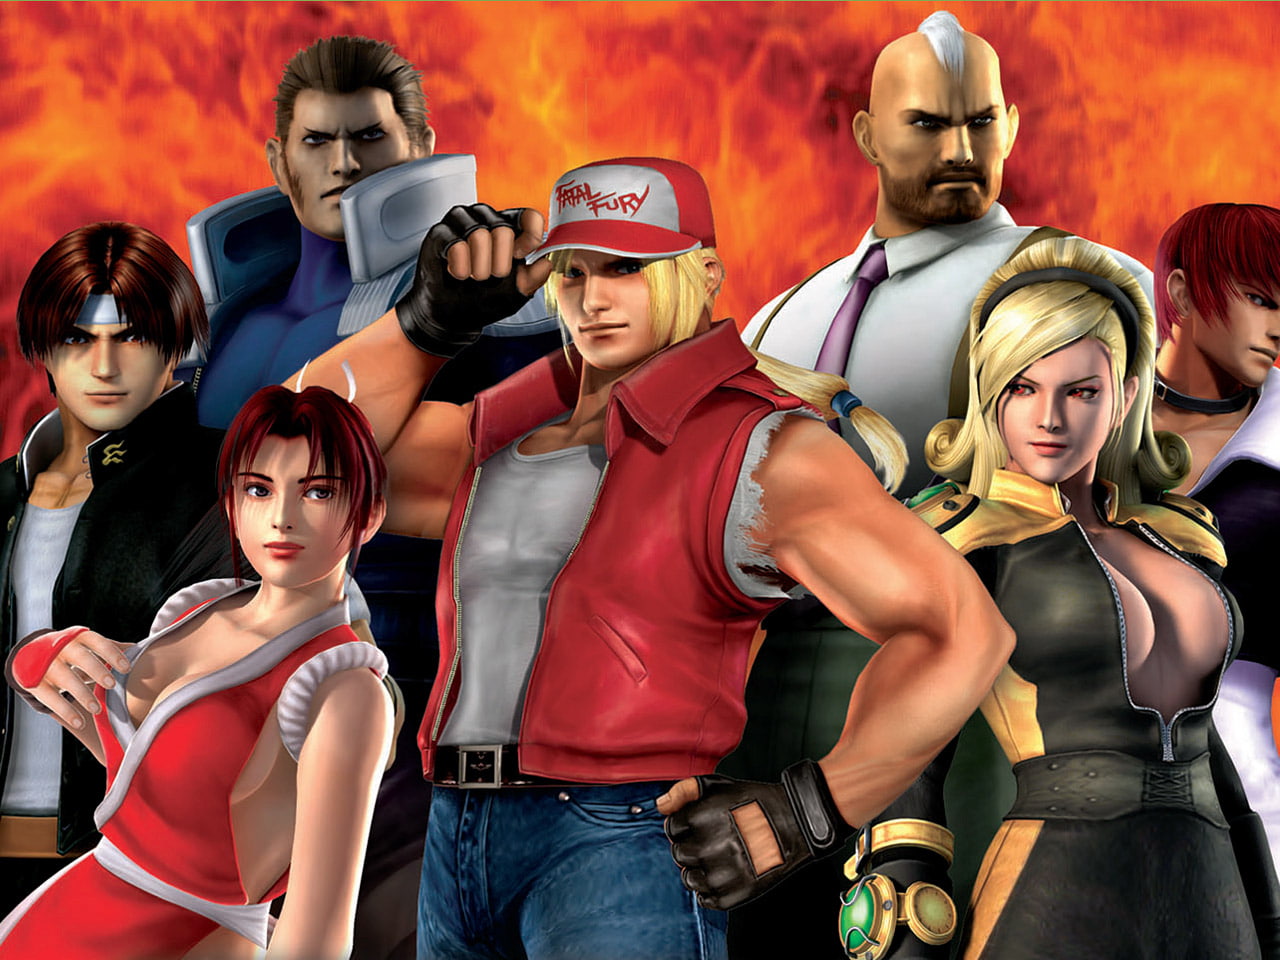 King of Fighters   Maximum Impact 2, group of people, women, adult